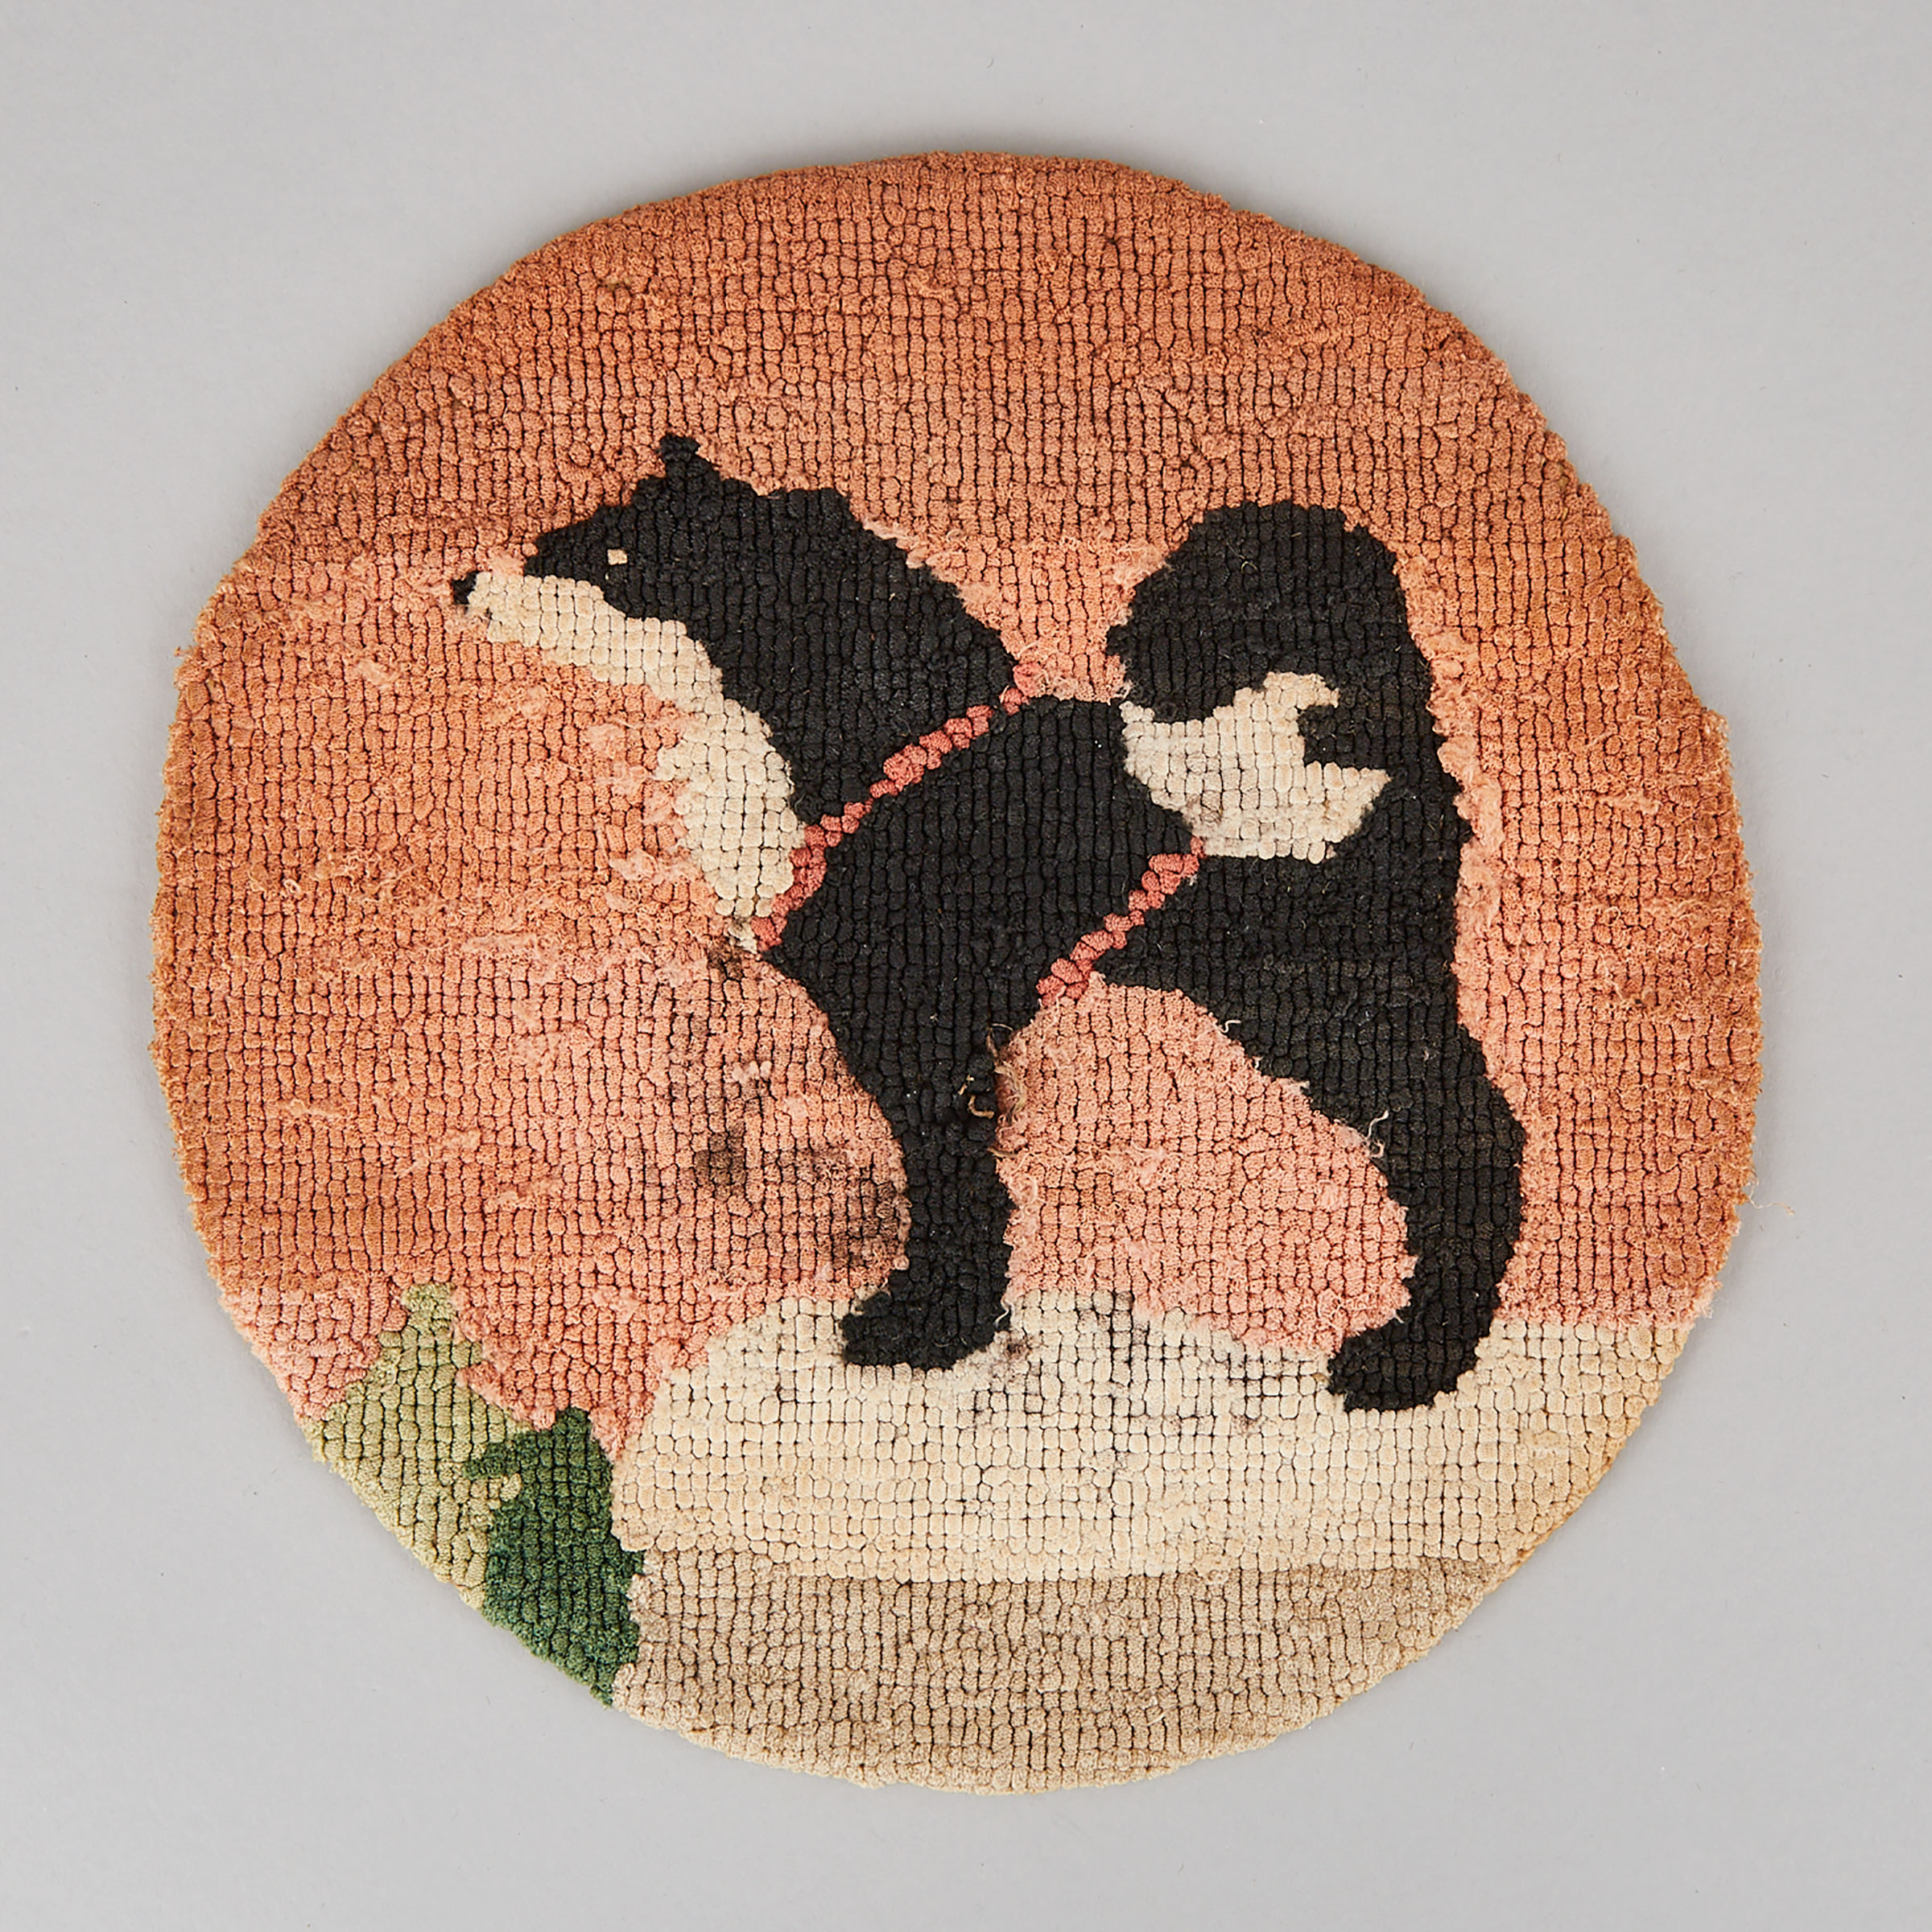 Grenfell Labrador Industries Hooked Mat Depicting a Sled Dog, c.1930